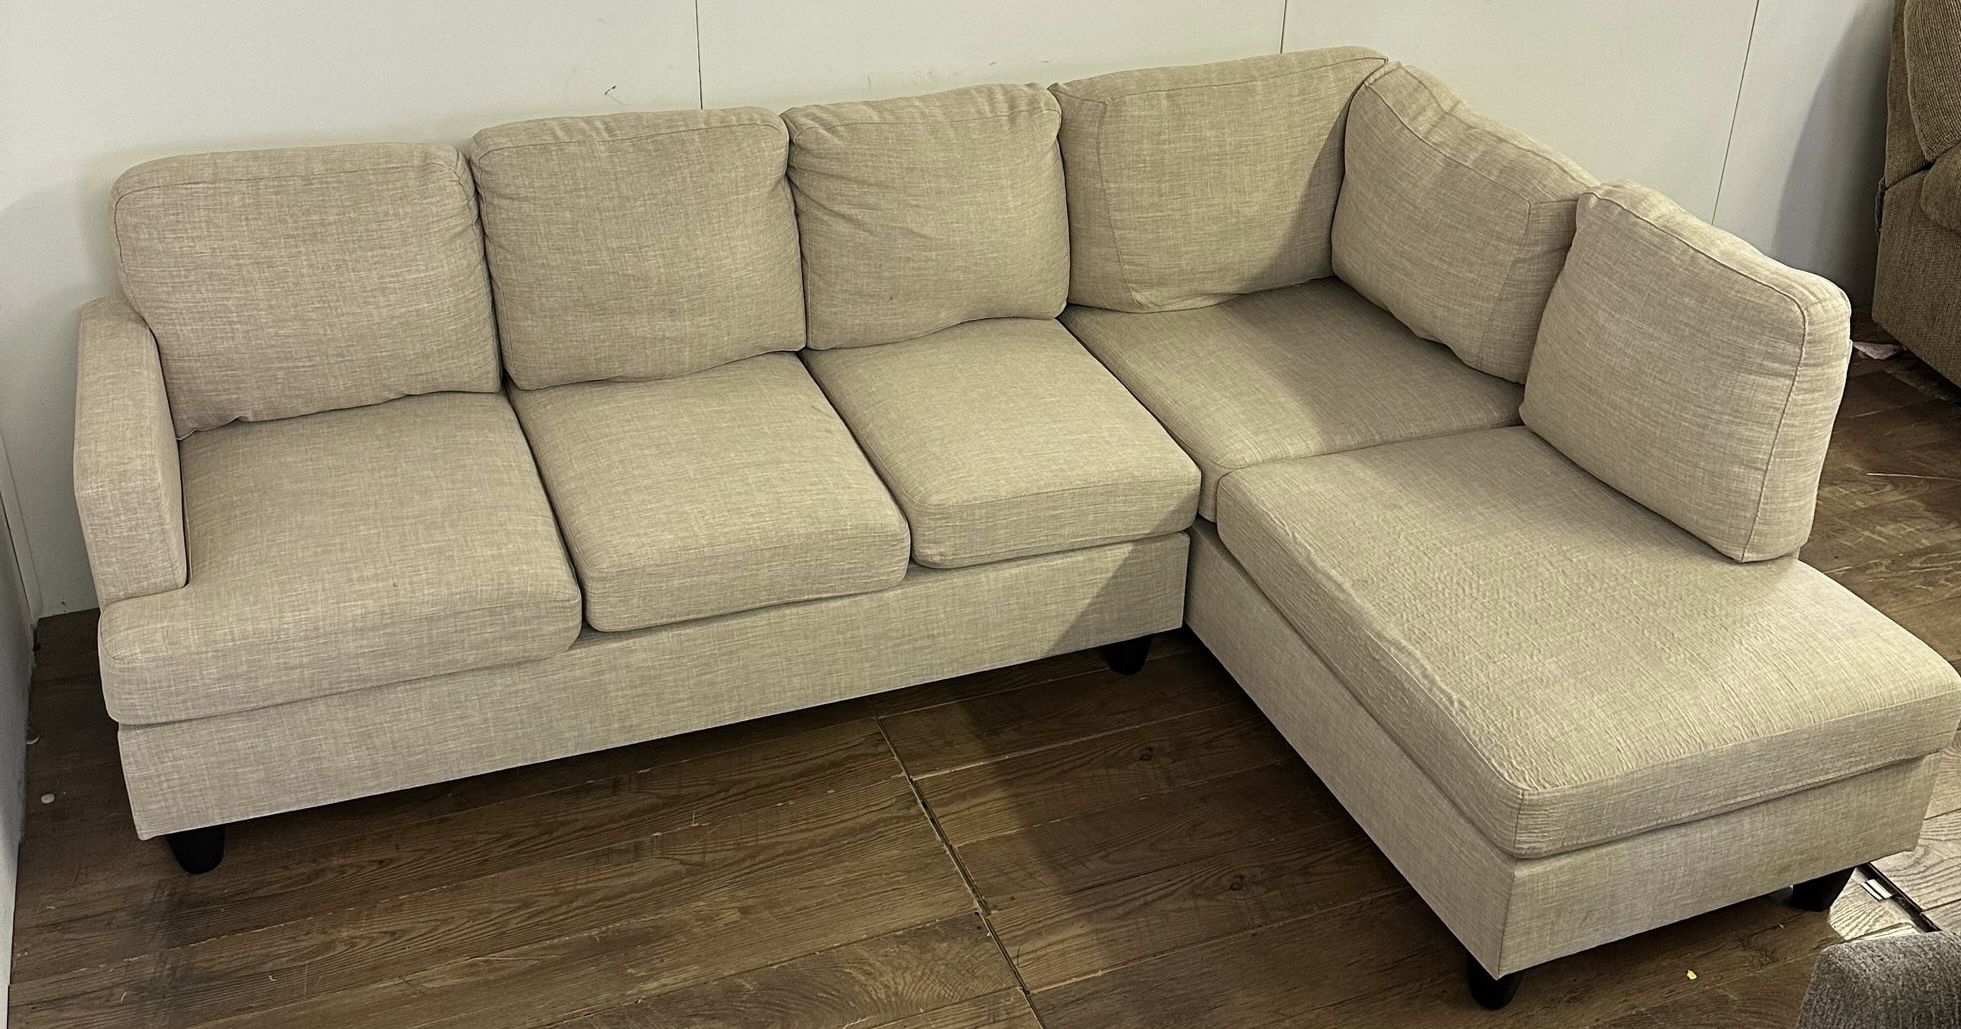 2 Piece Sectional Couch With Delivery